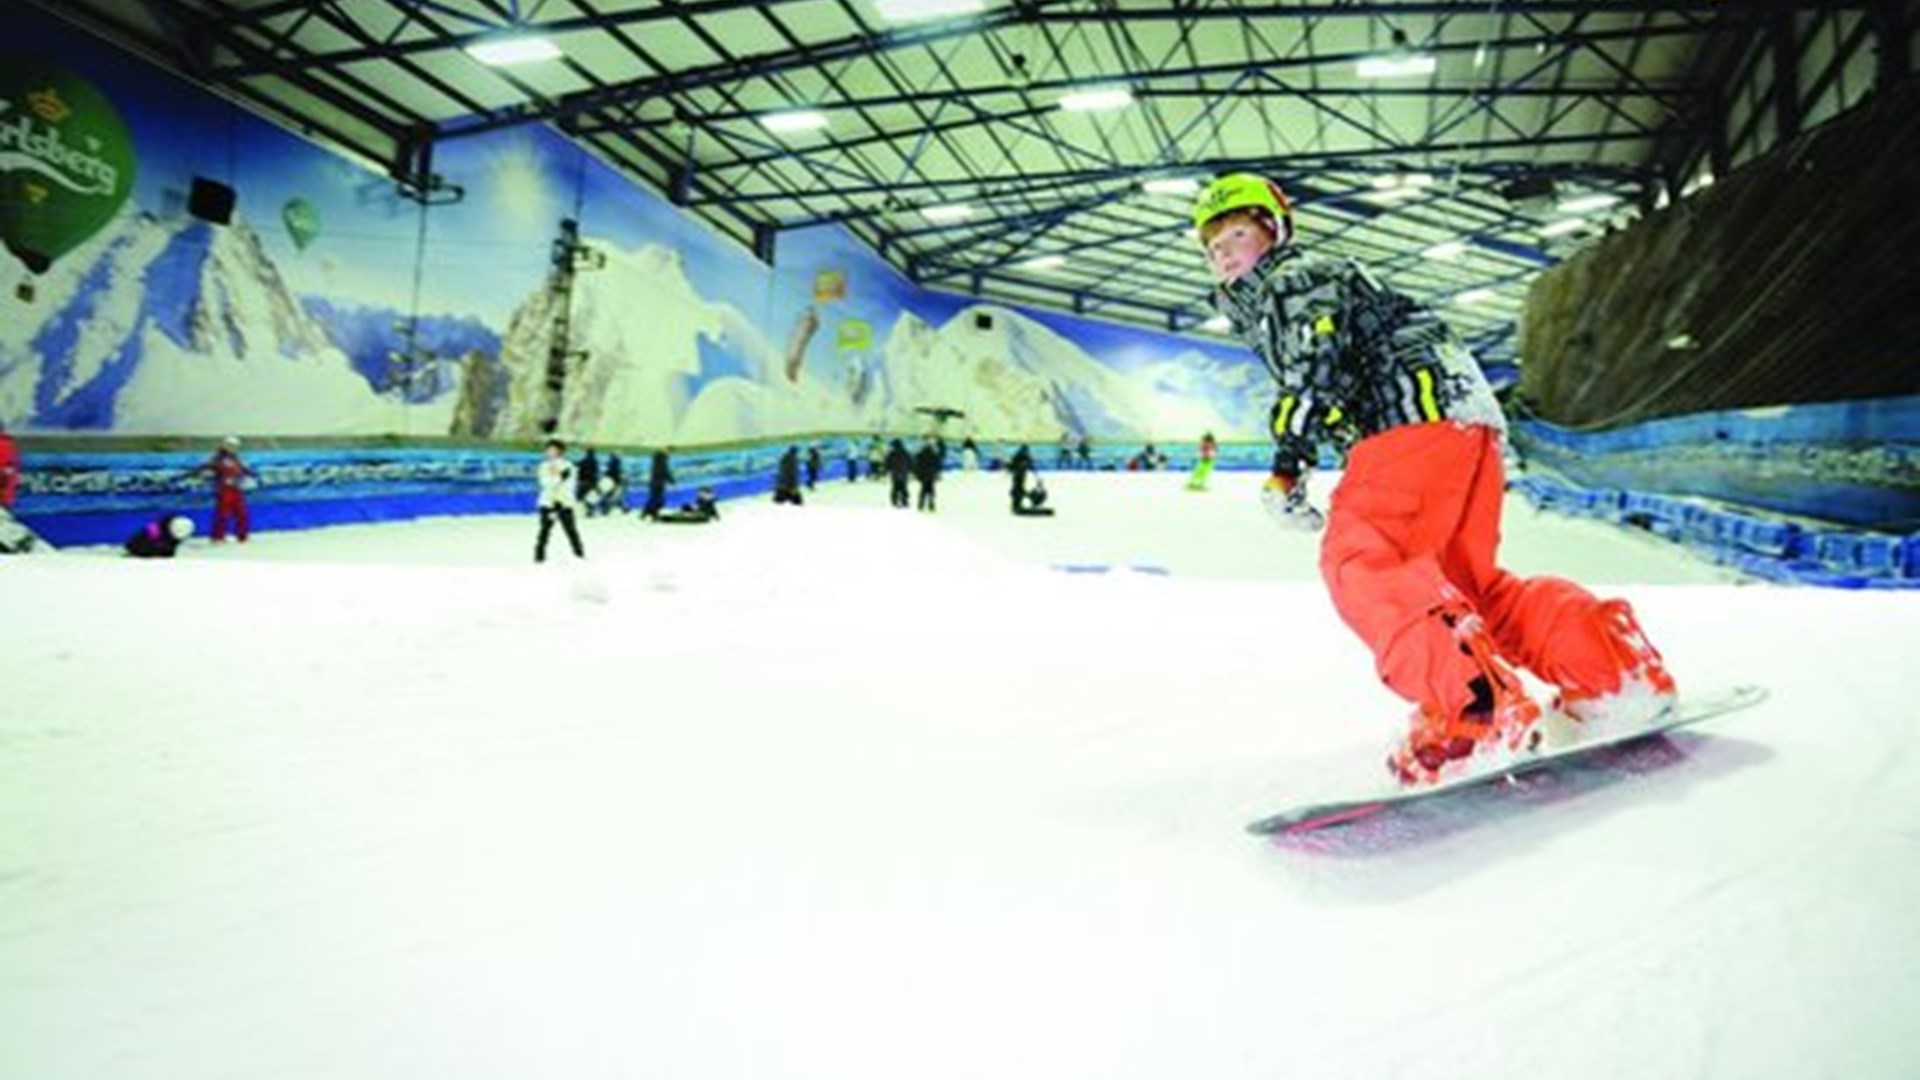 Snowborder going down hill at the snowdome